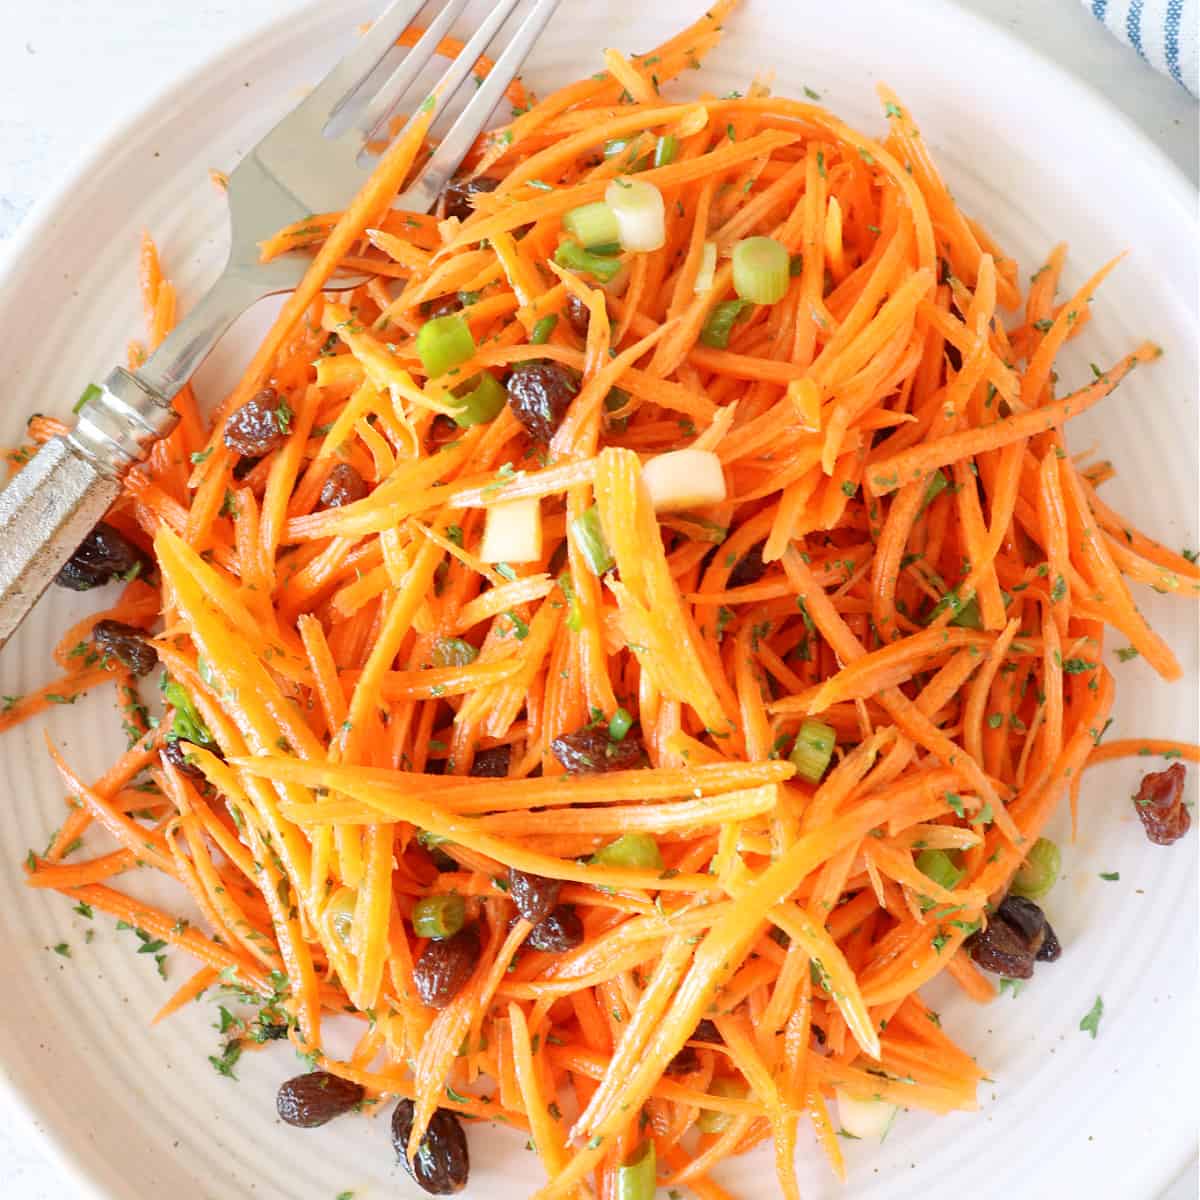 Carrot salad on a salad plate with fork.